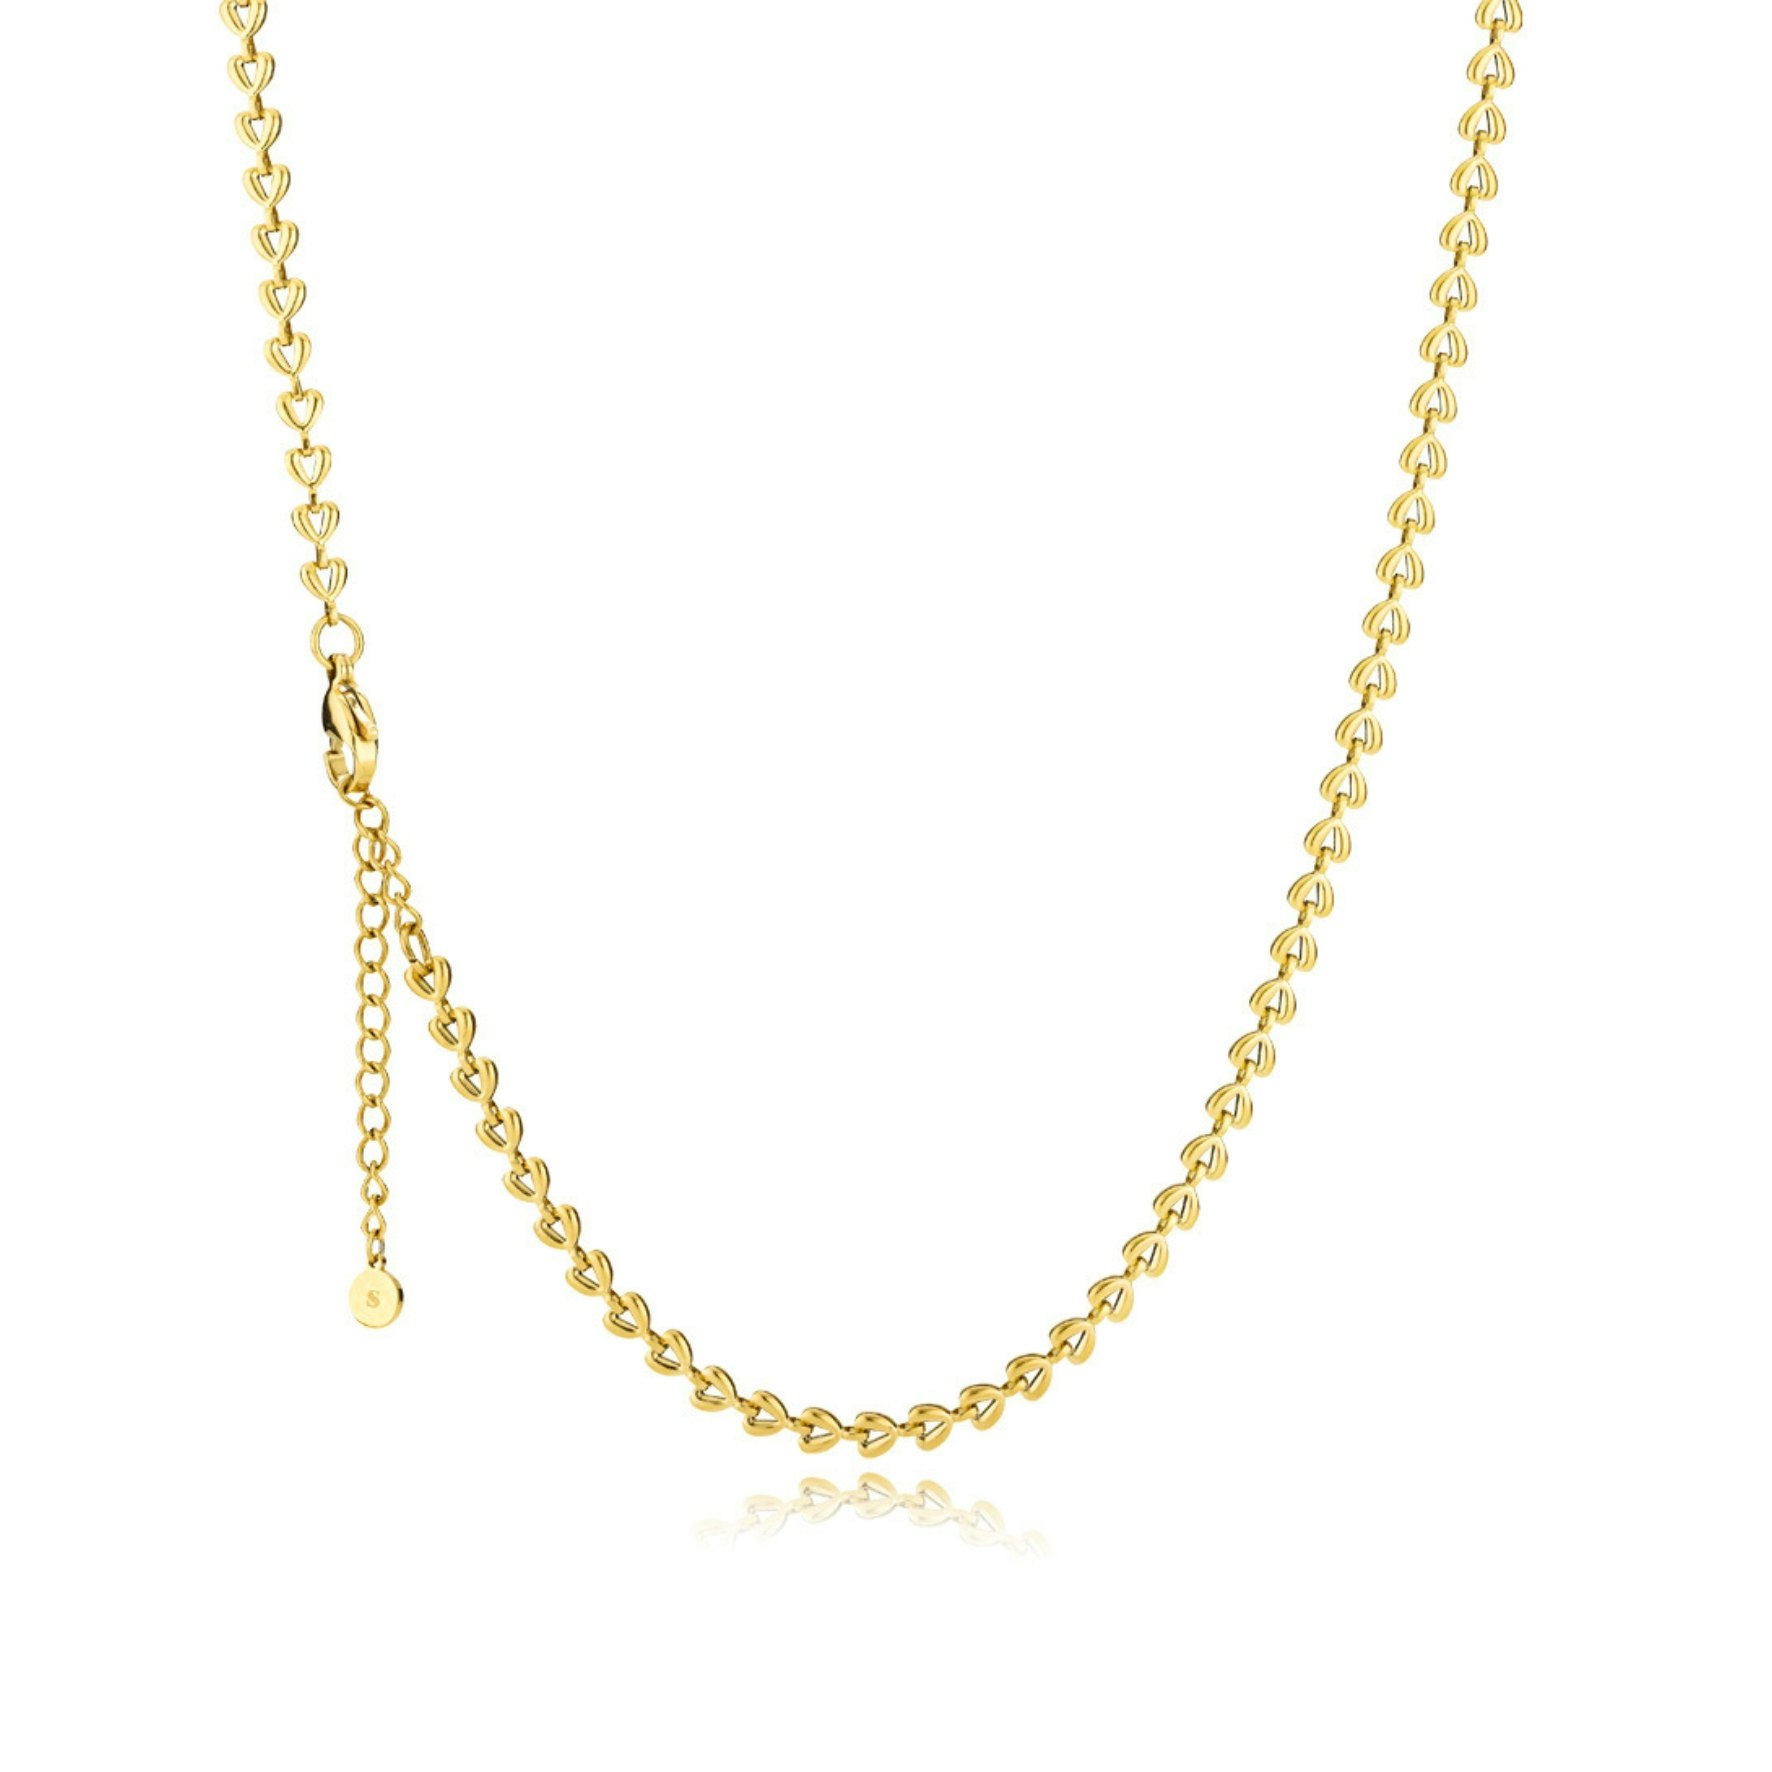 Victoria Necklace from Sistie 2nd in Goldplated stainless steel